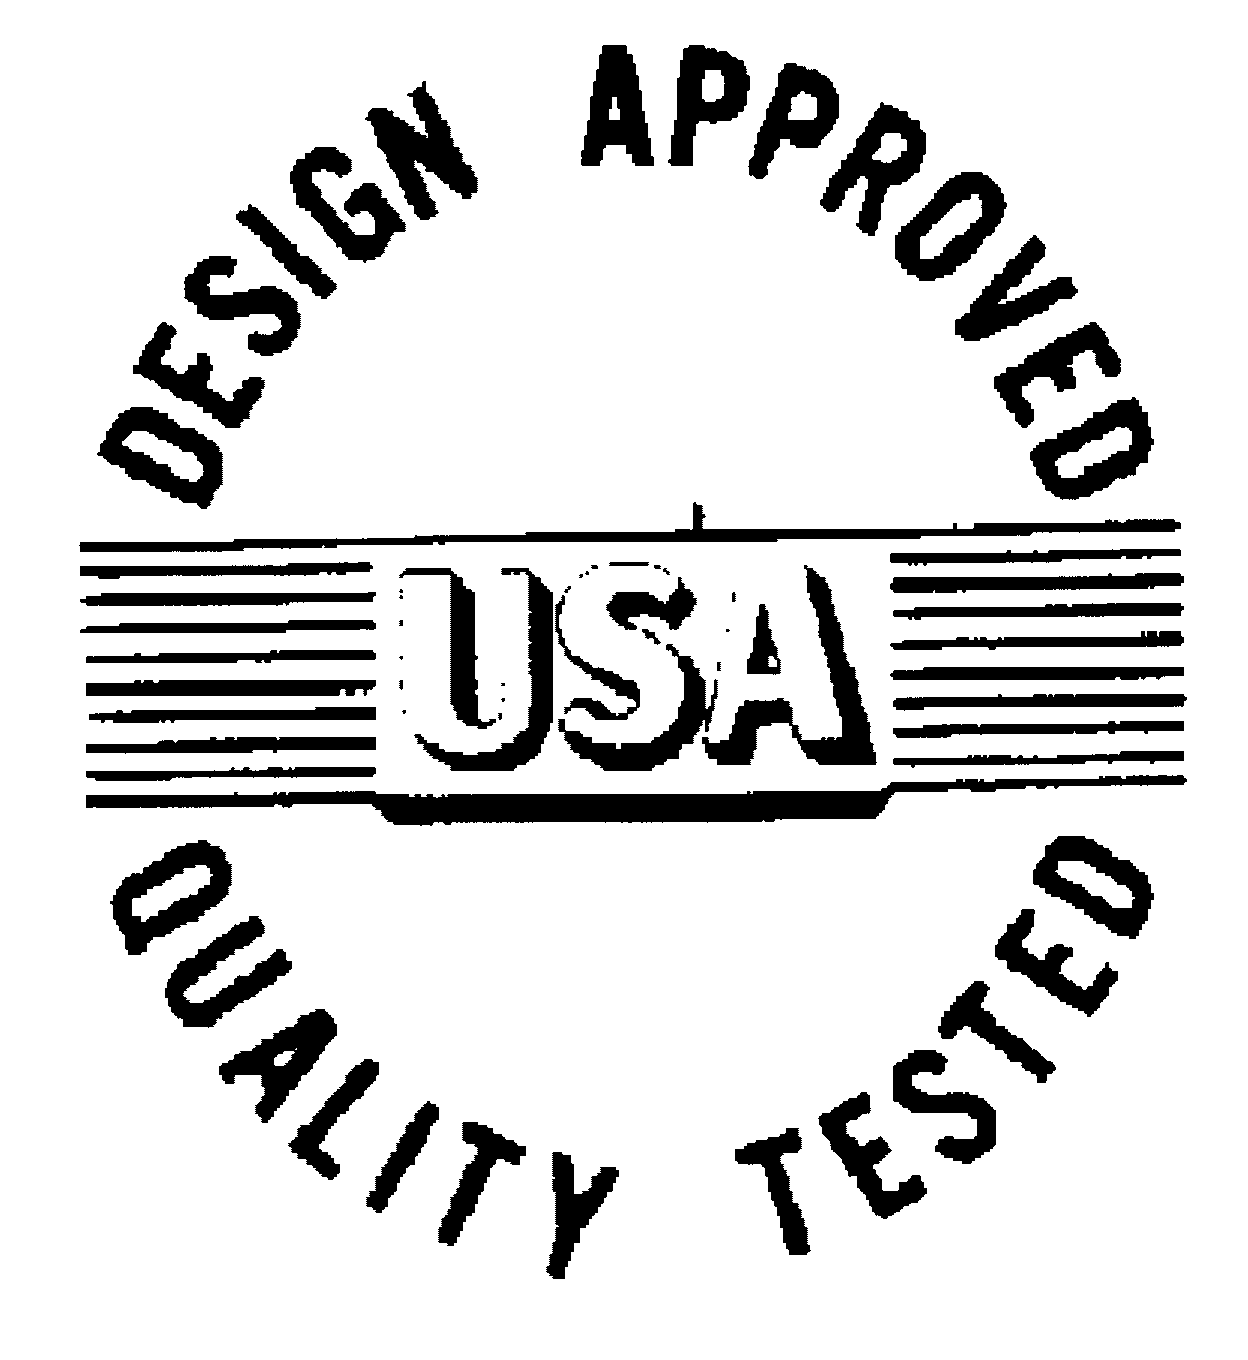  USA DESIGN APPROVED QUALITY TESTED